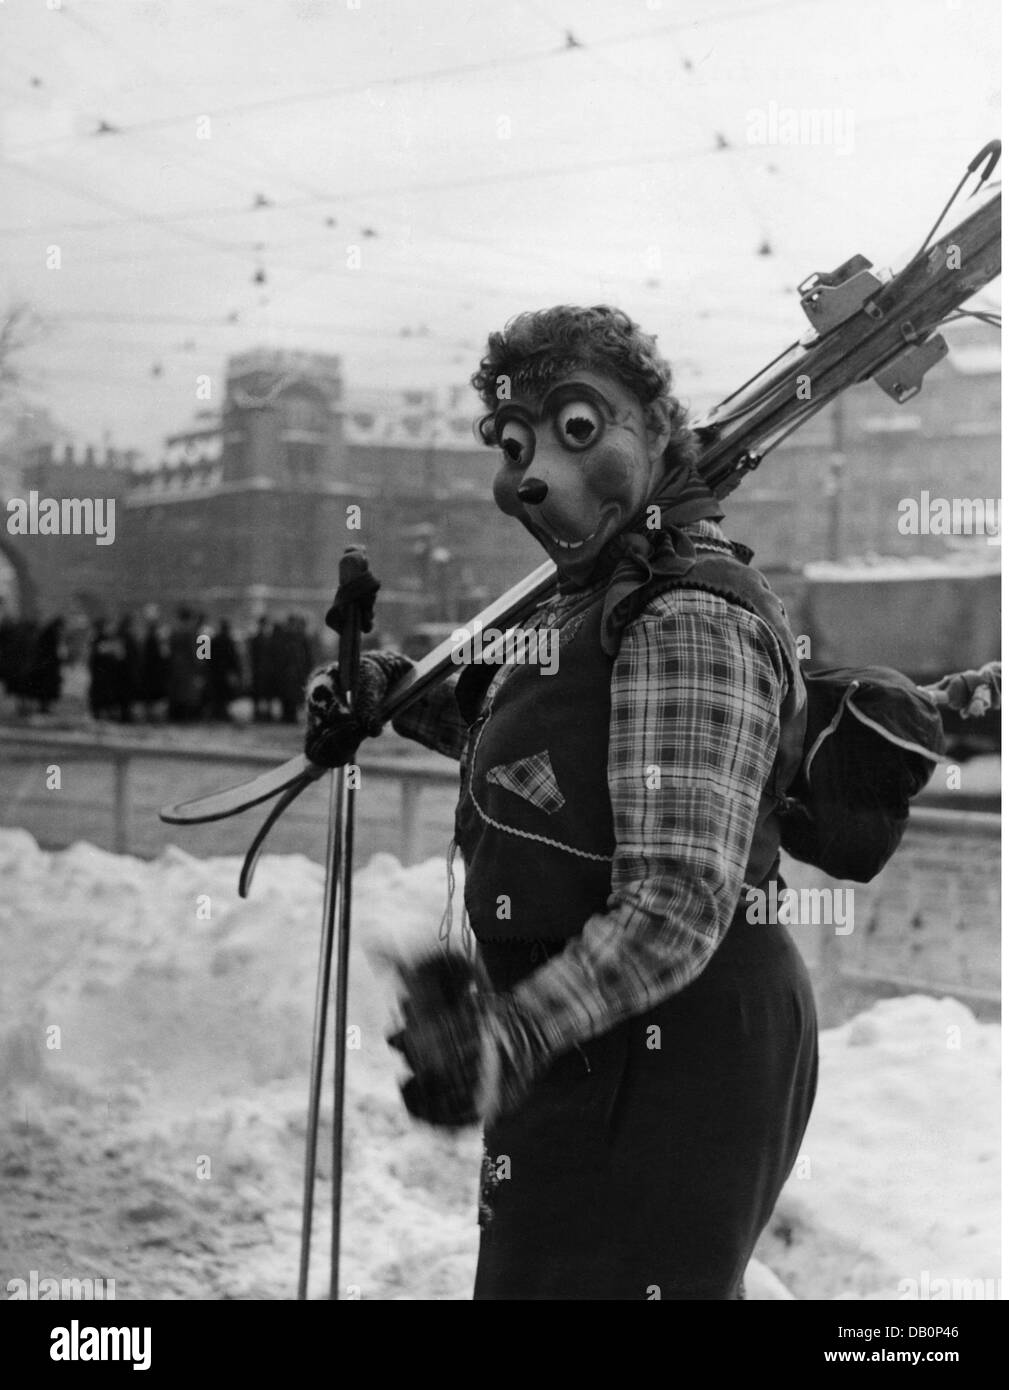 festivities, carnival, carnival reveller with Mecki mask and skis, Karlsplatz, Munich, 1950s / 1960s, Additional-Rights-Clearences-Not Available Stock Photo